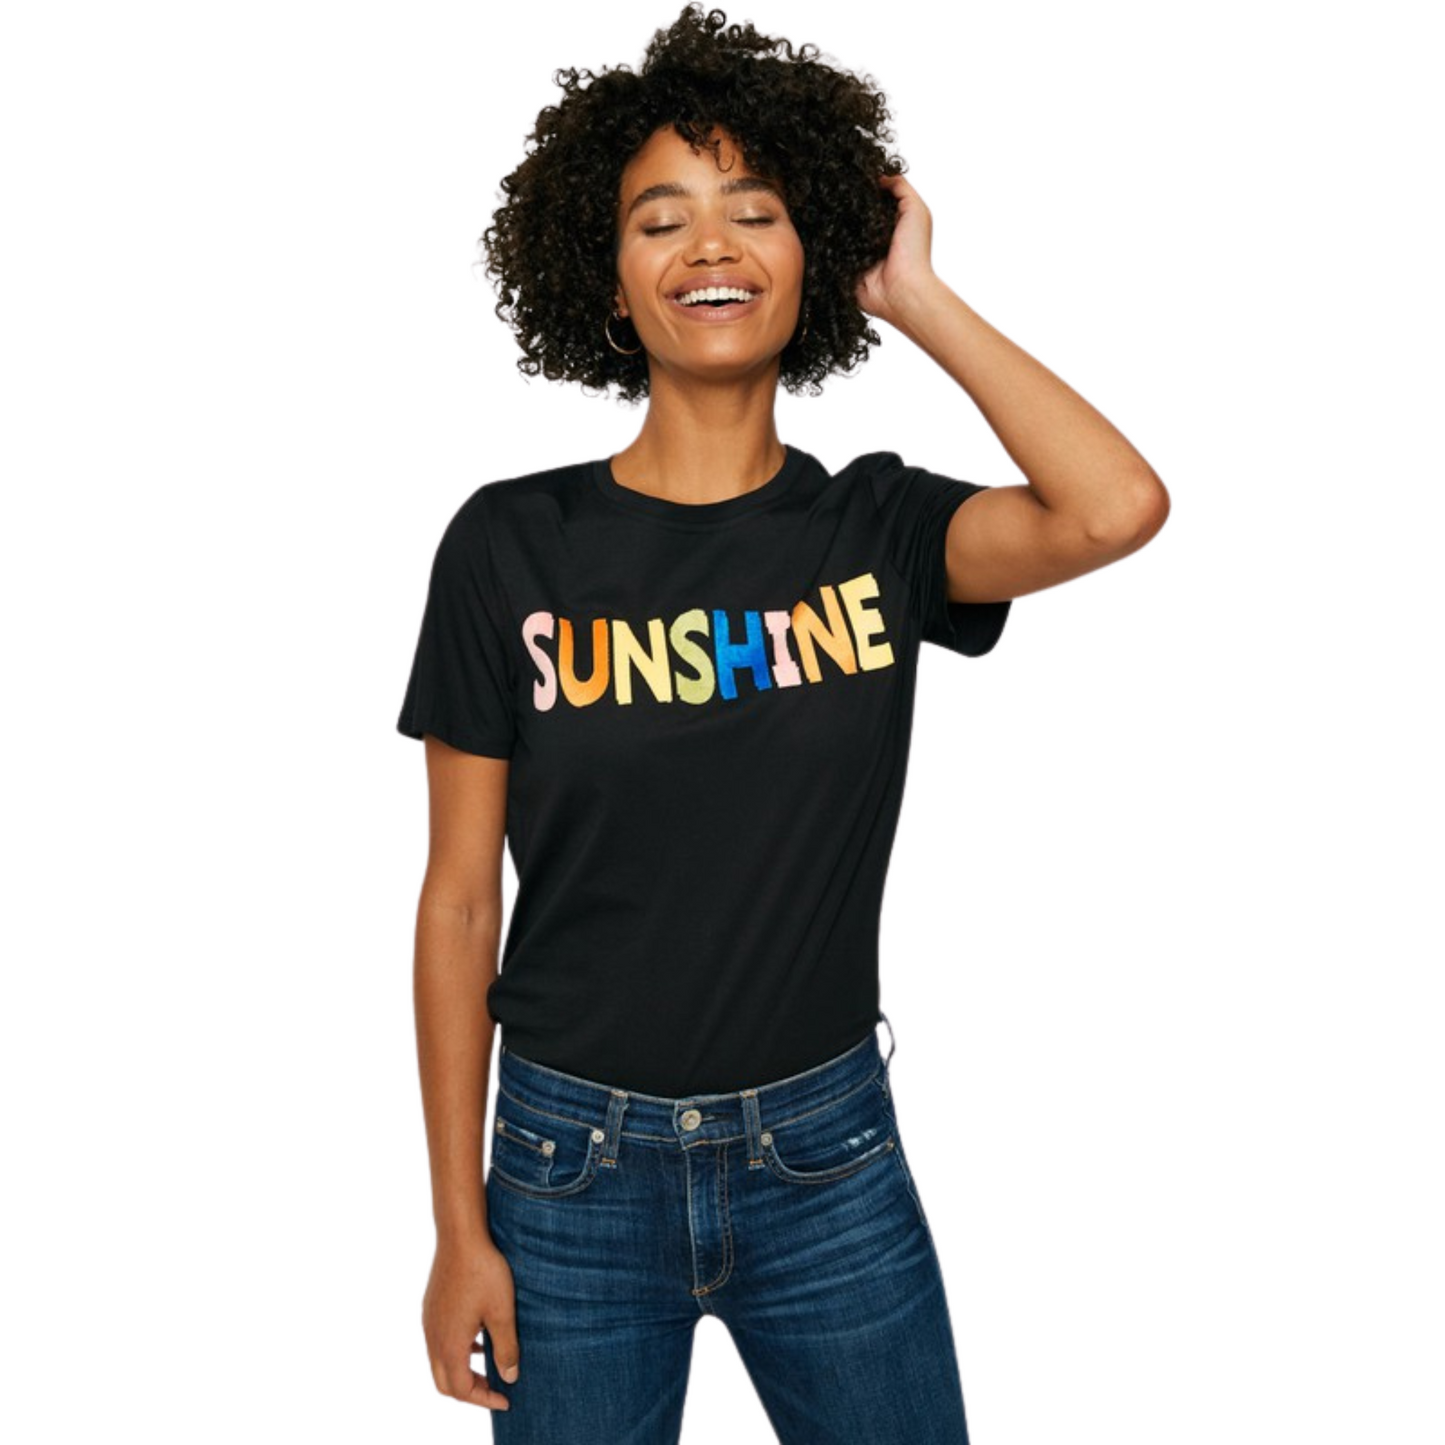 Sunshine Flocked Tee is crafted with a lightweight stretch fabric,<br>featuring a banded round-cut neckline, dual side slits, and a <br>pull-on silhouette.